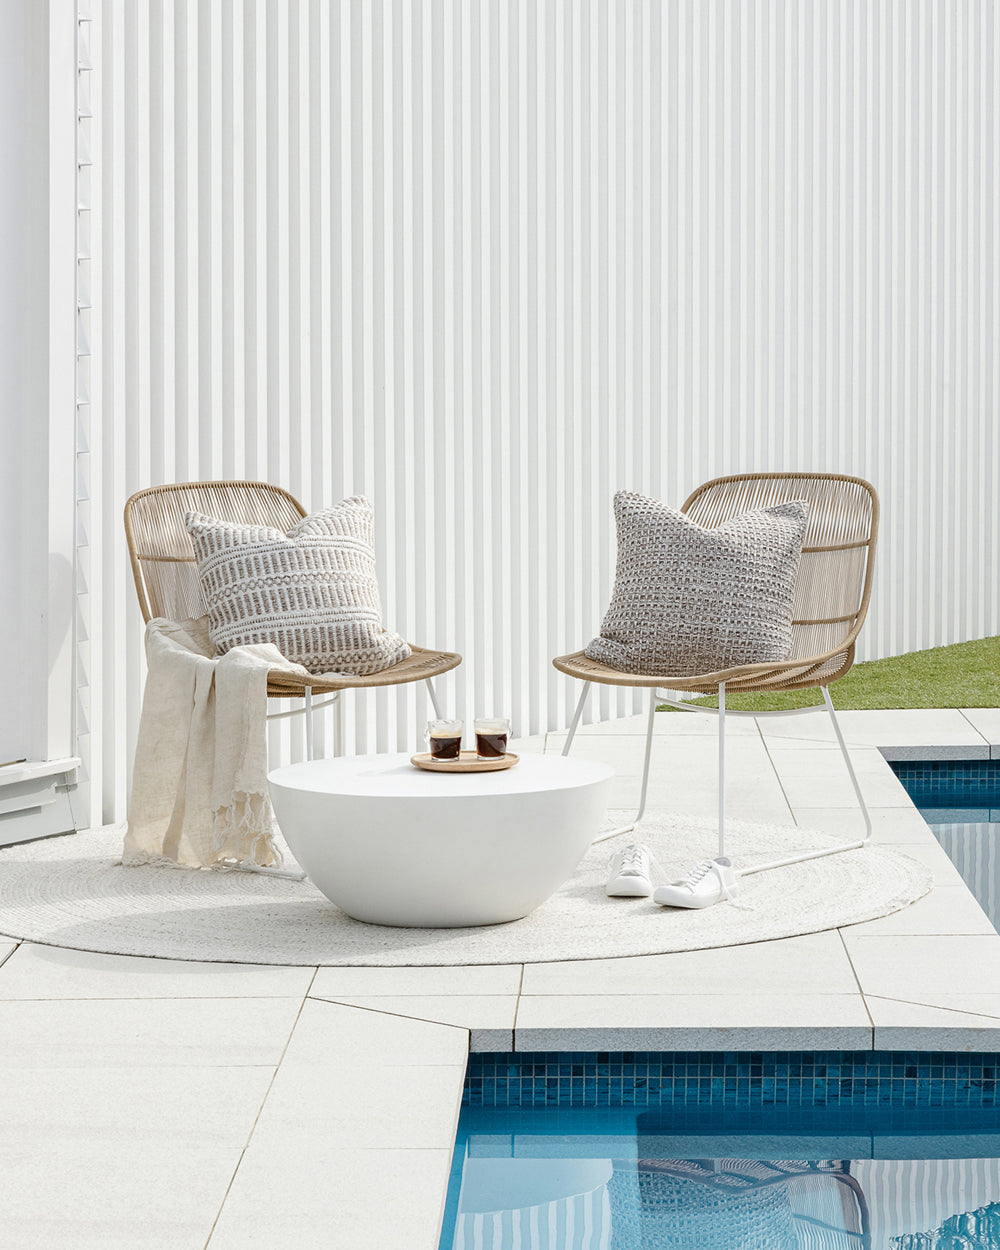 Elton Wicker outdoor cushion with the morgan cushion on wicker chairs beside a pool surrounded by white tiles